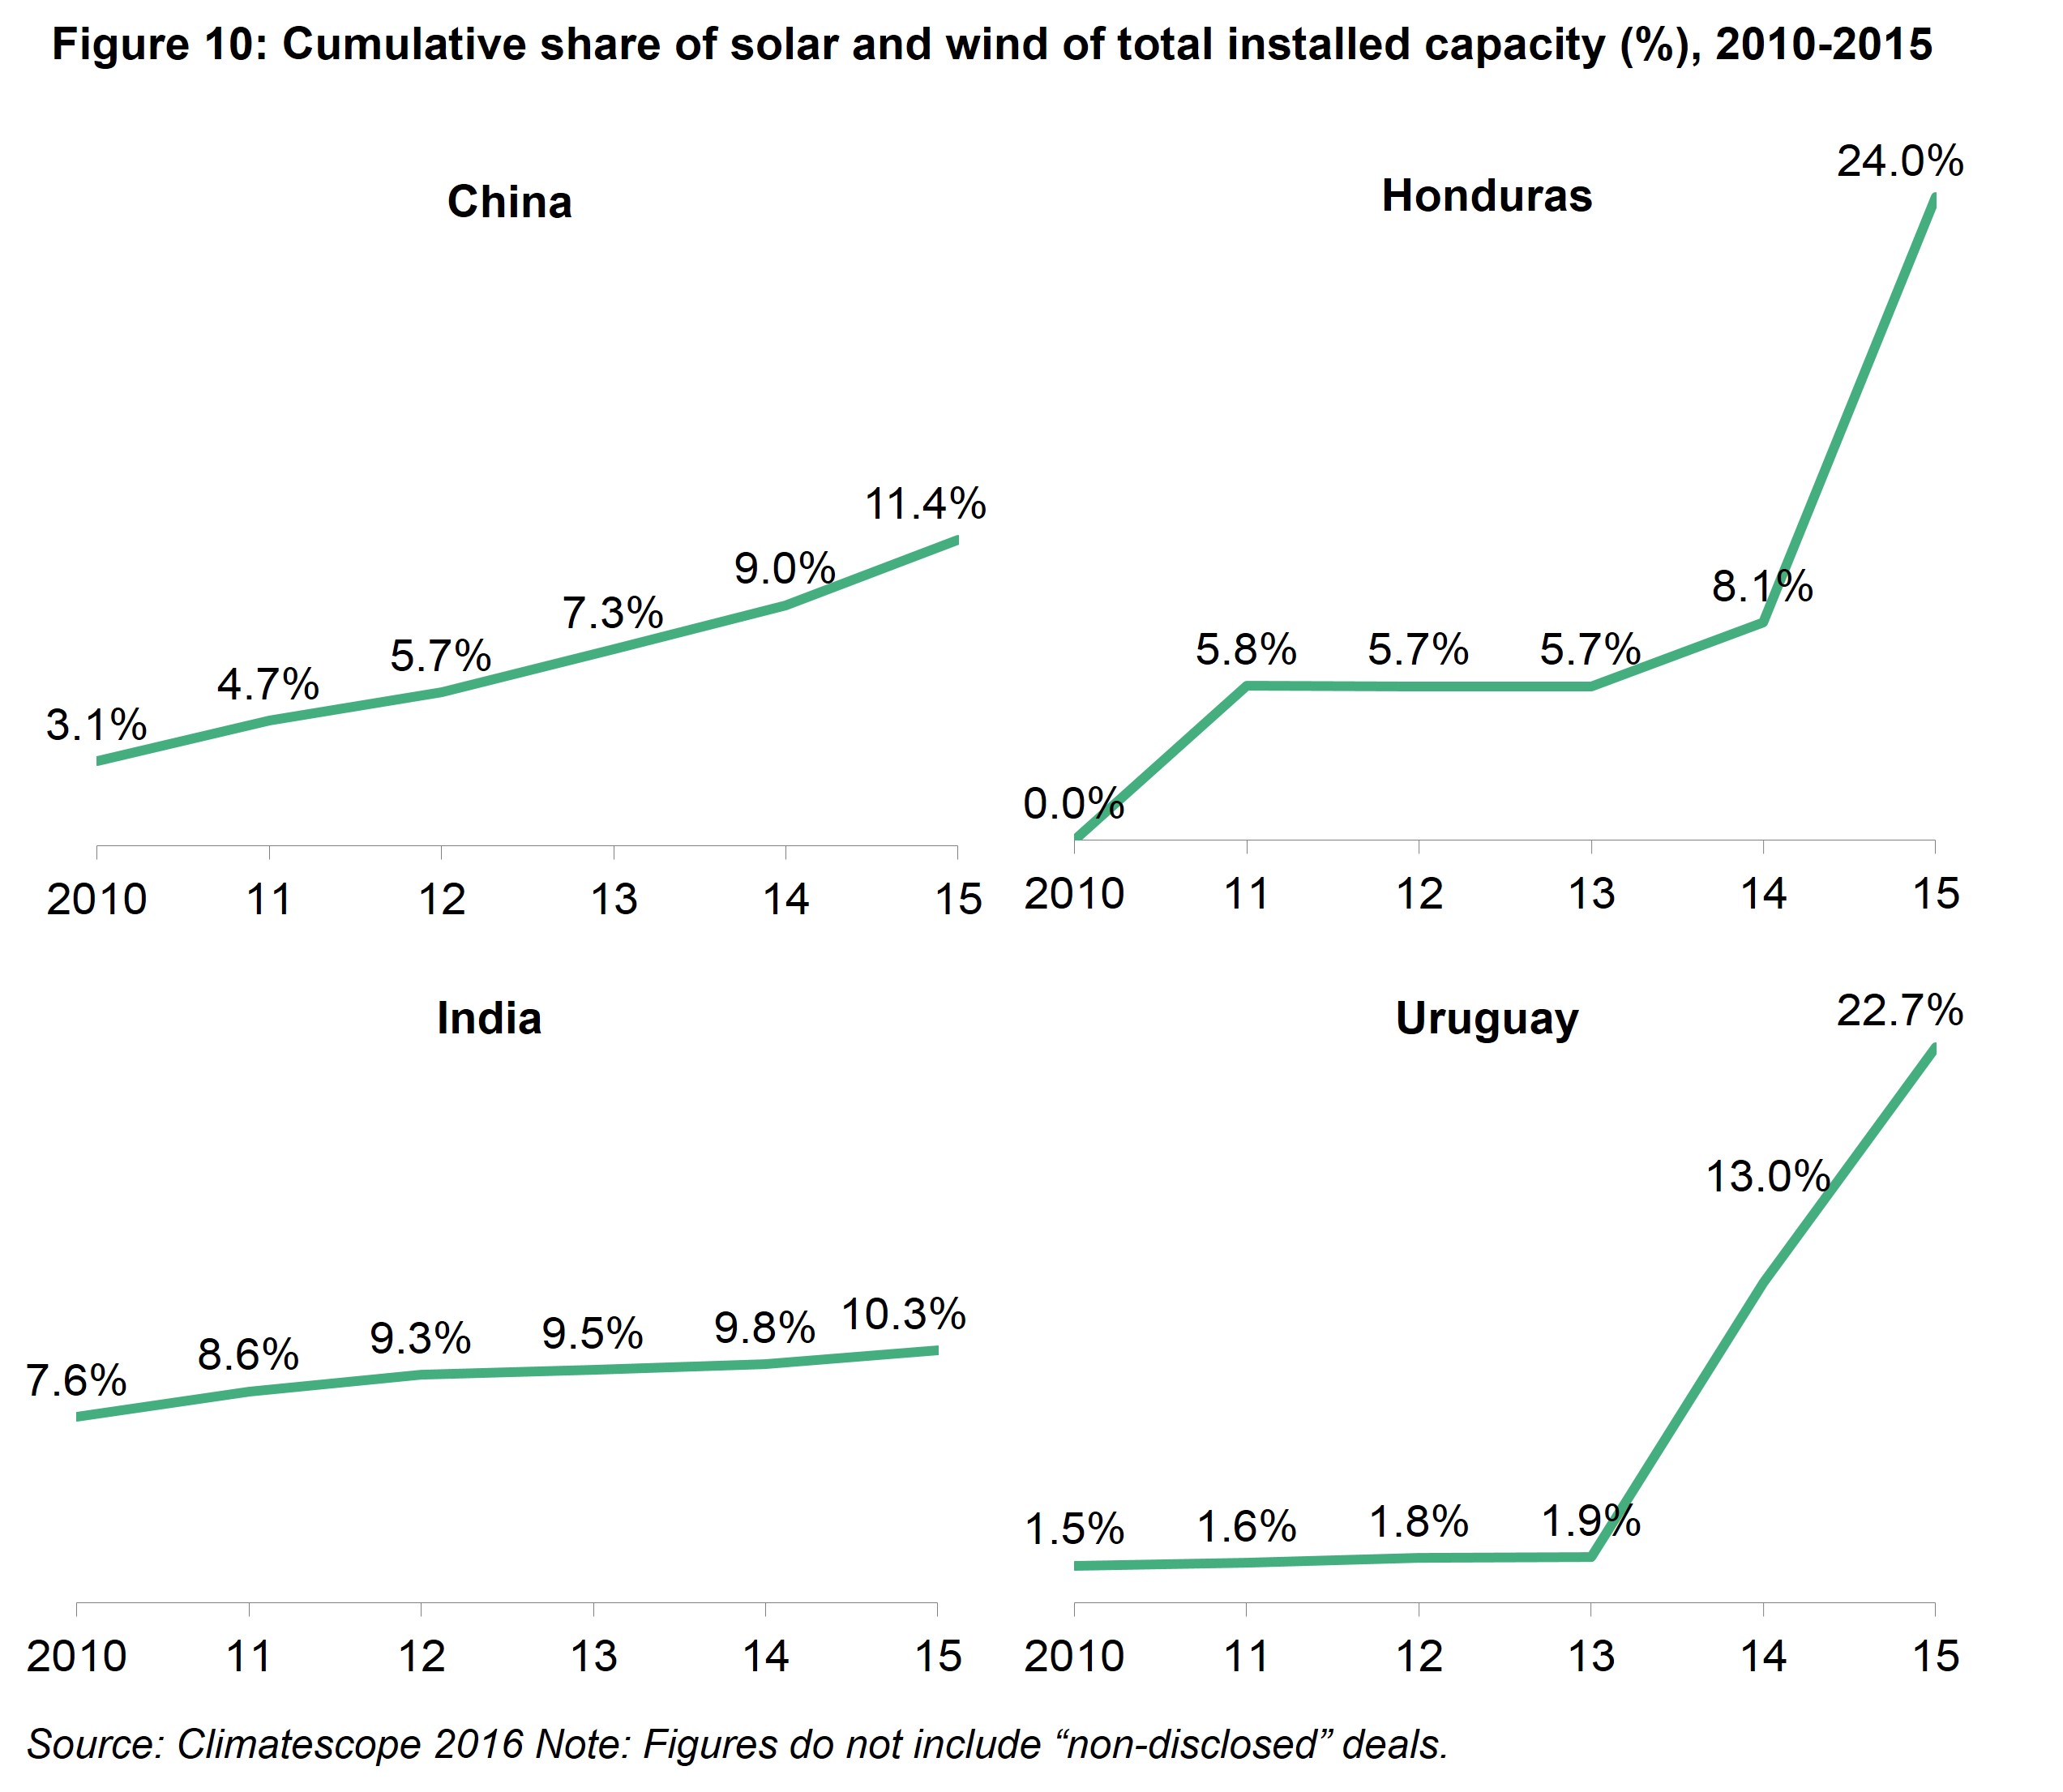 Executive Summary Fig 10 - Cumulative share of solar and wind in total installed capacity (%), 2010-2015